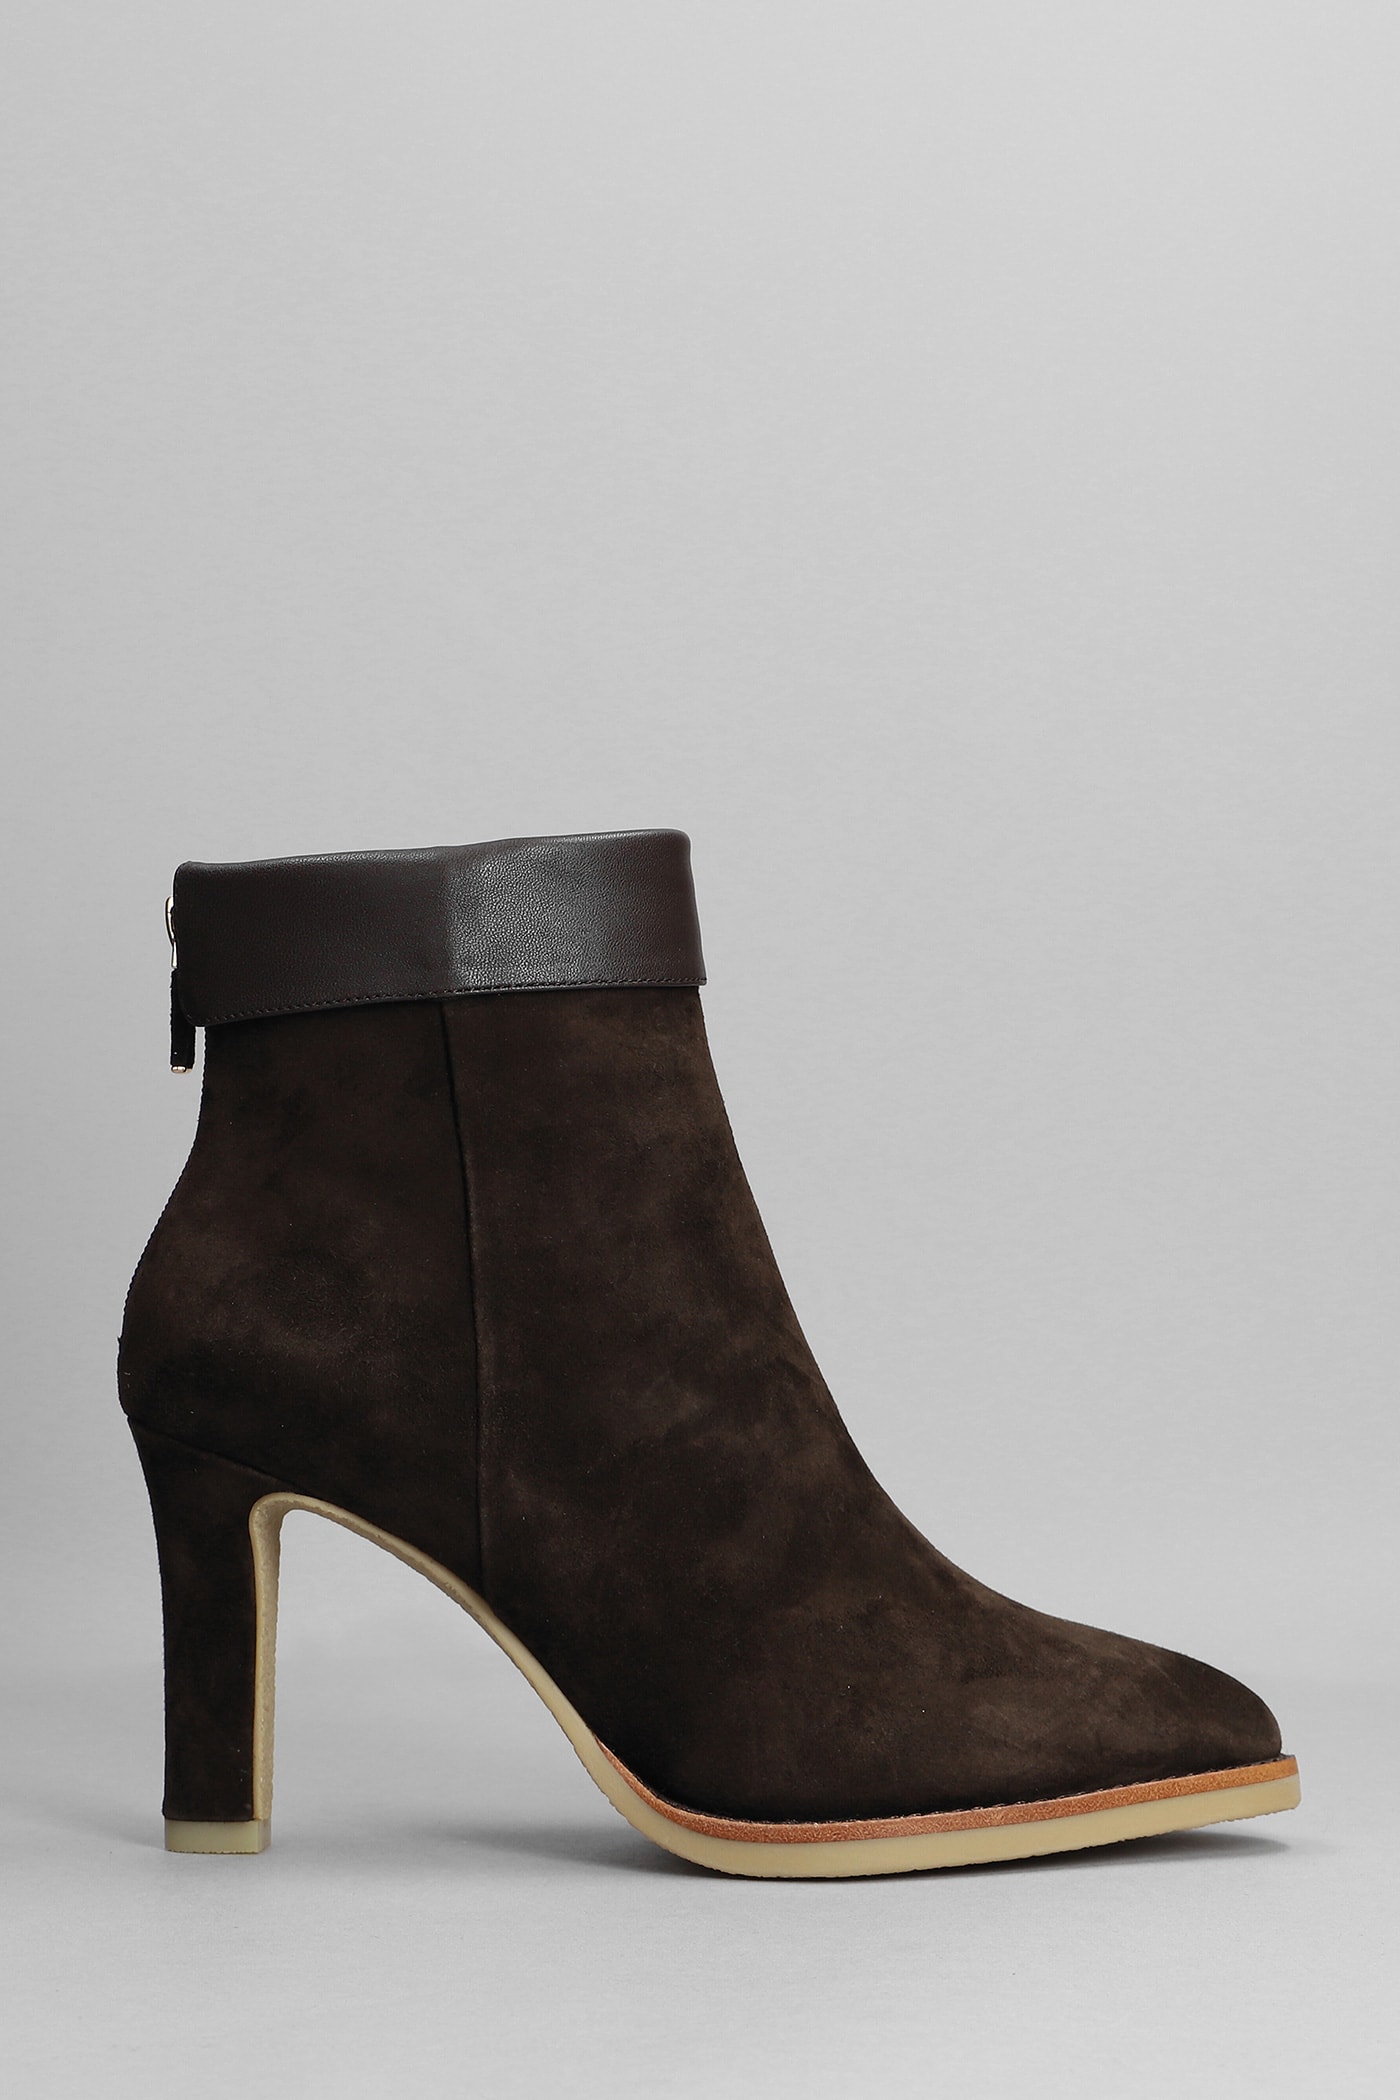 Lola Cruz High Heels Ankle Boots In Brown Suede And Leather